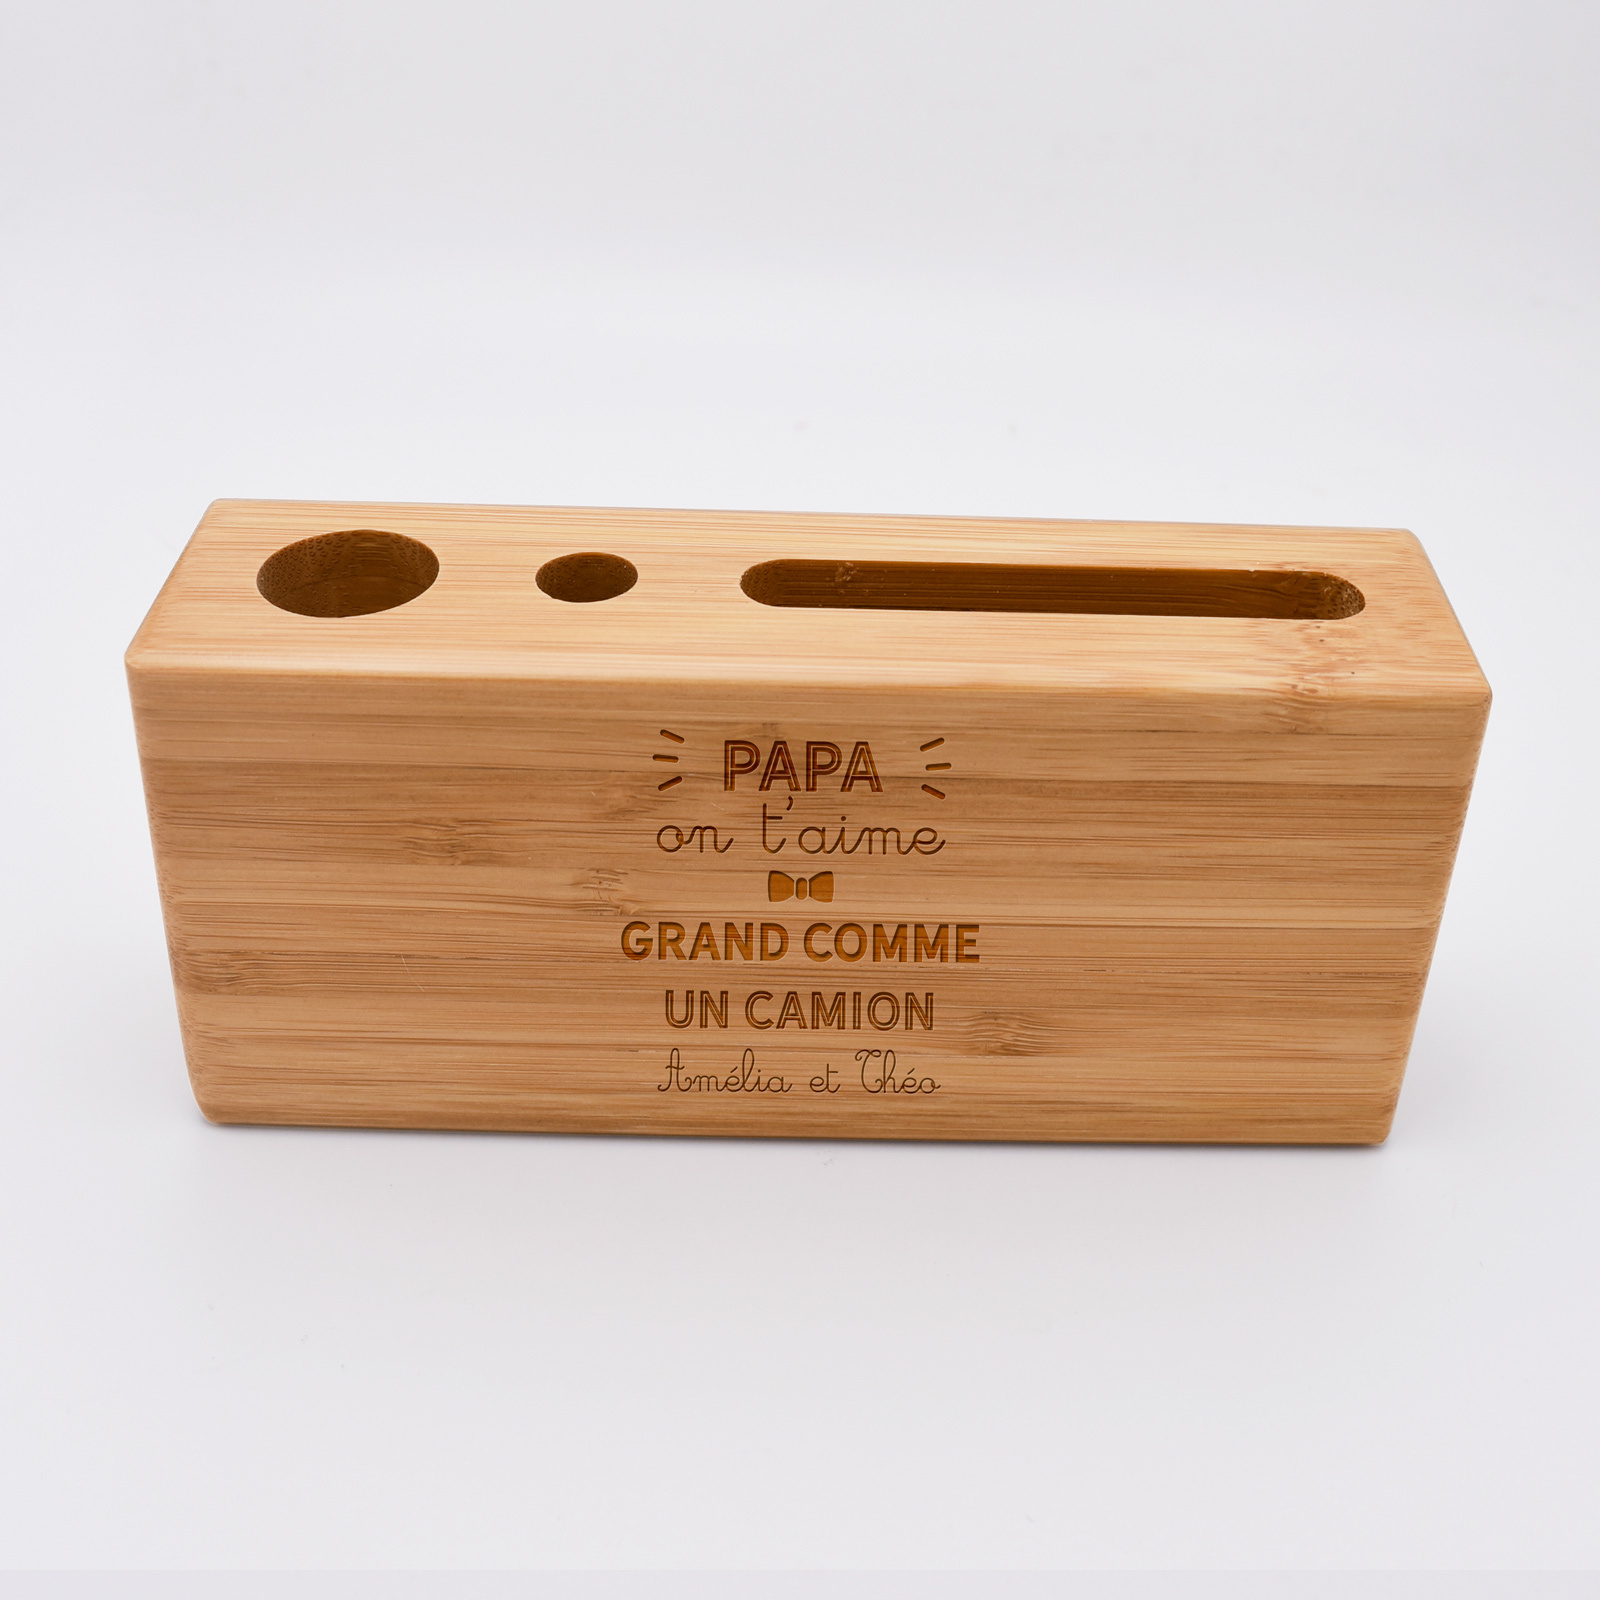 Personalized desk organizer 14,6x6,5 cm wood engraved - special edition " Papa on t'aime"